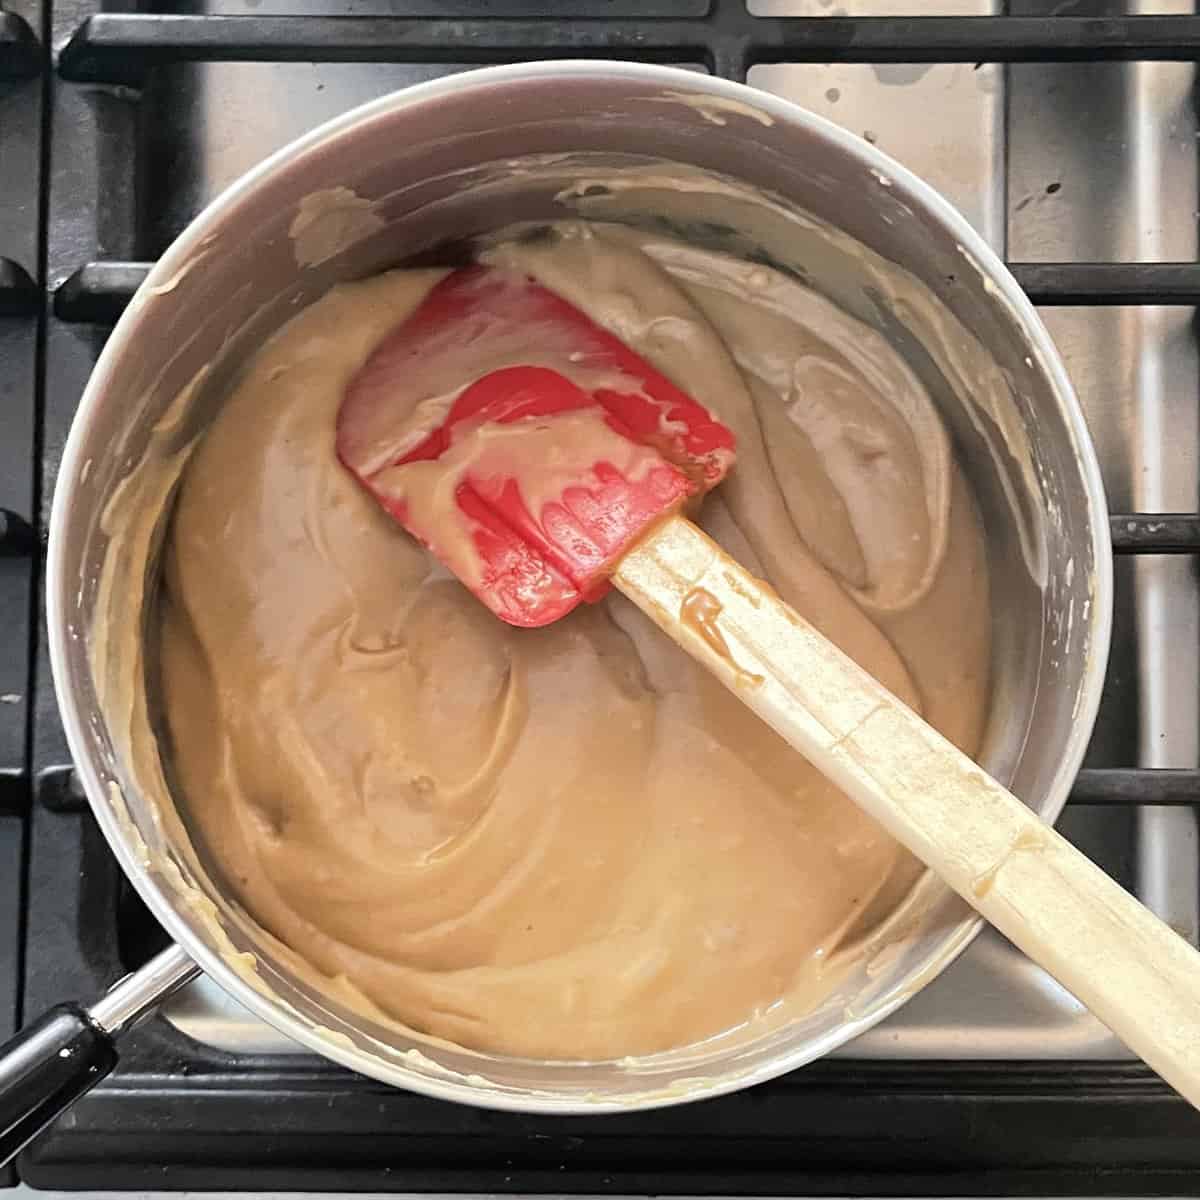 caramel colored pudding and a red silicone whisk in a small pot.